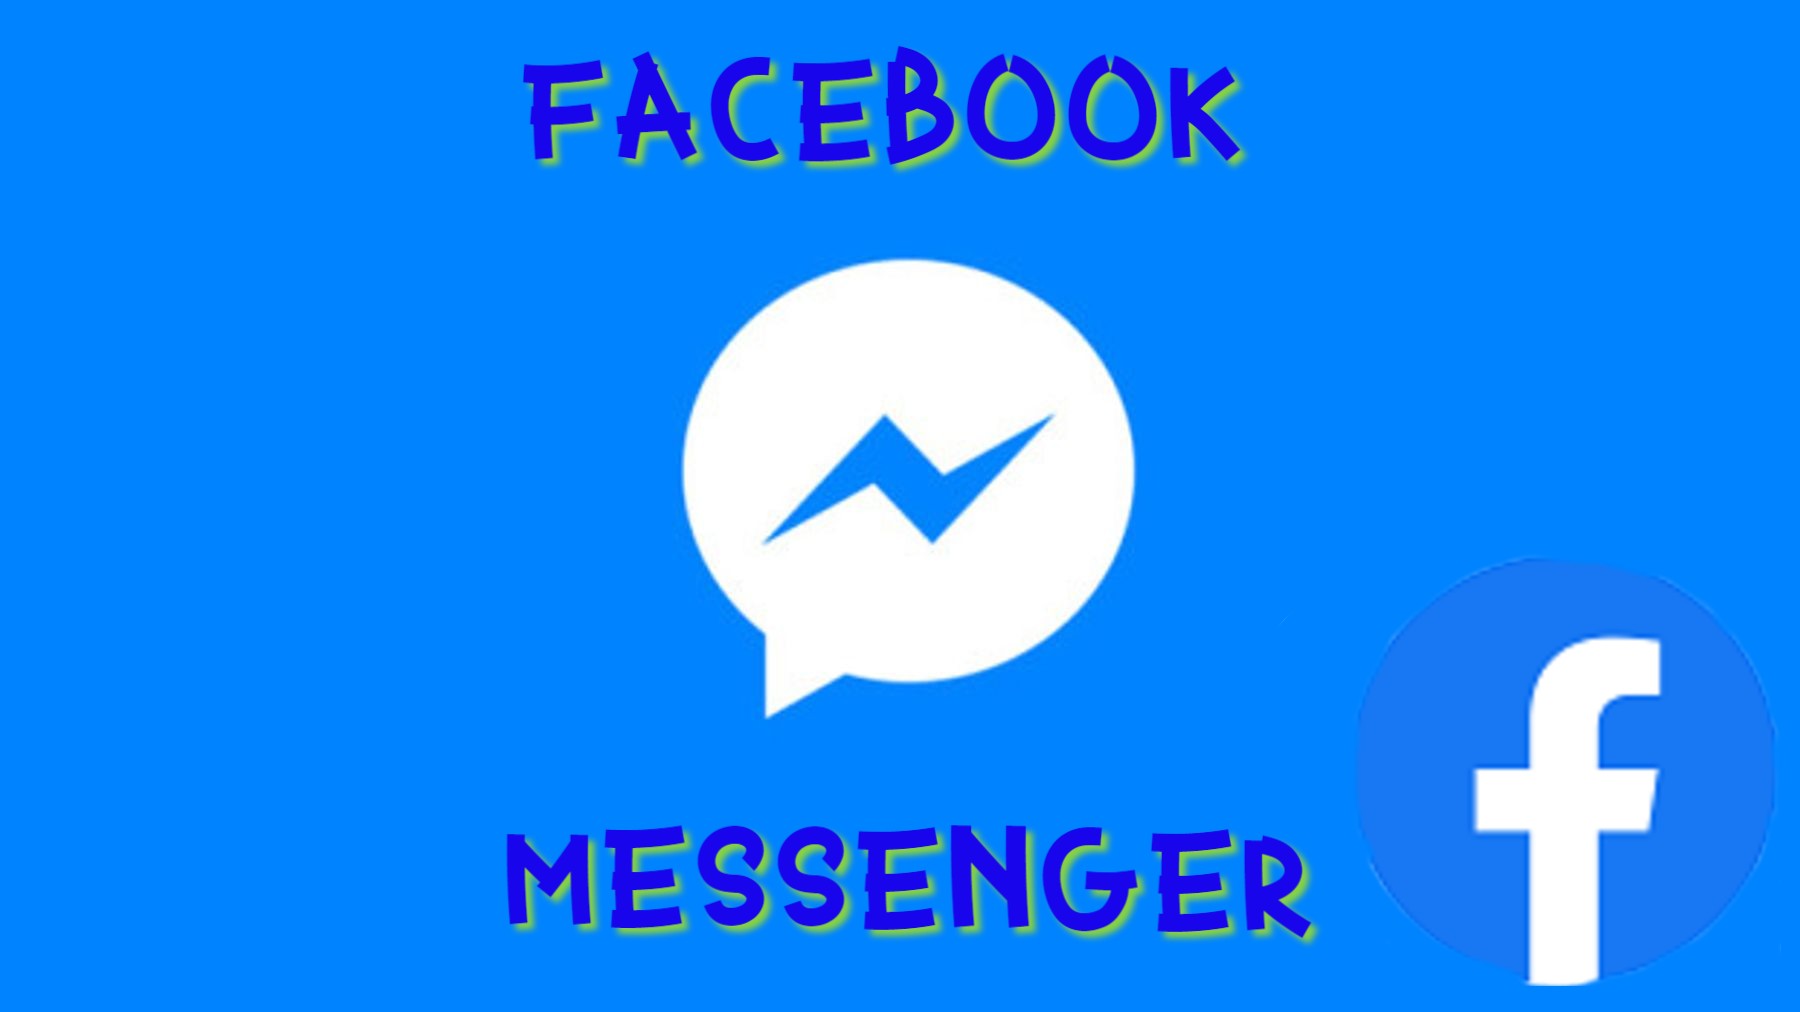 All That You Need To Know About Facebook Messenger